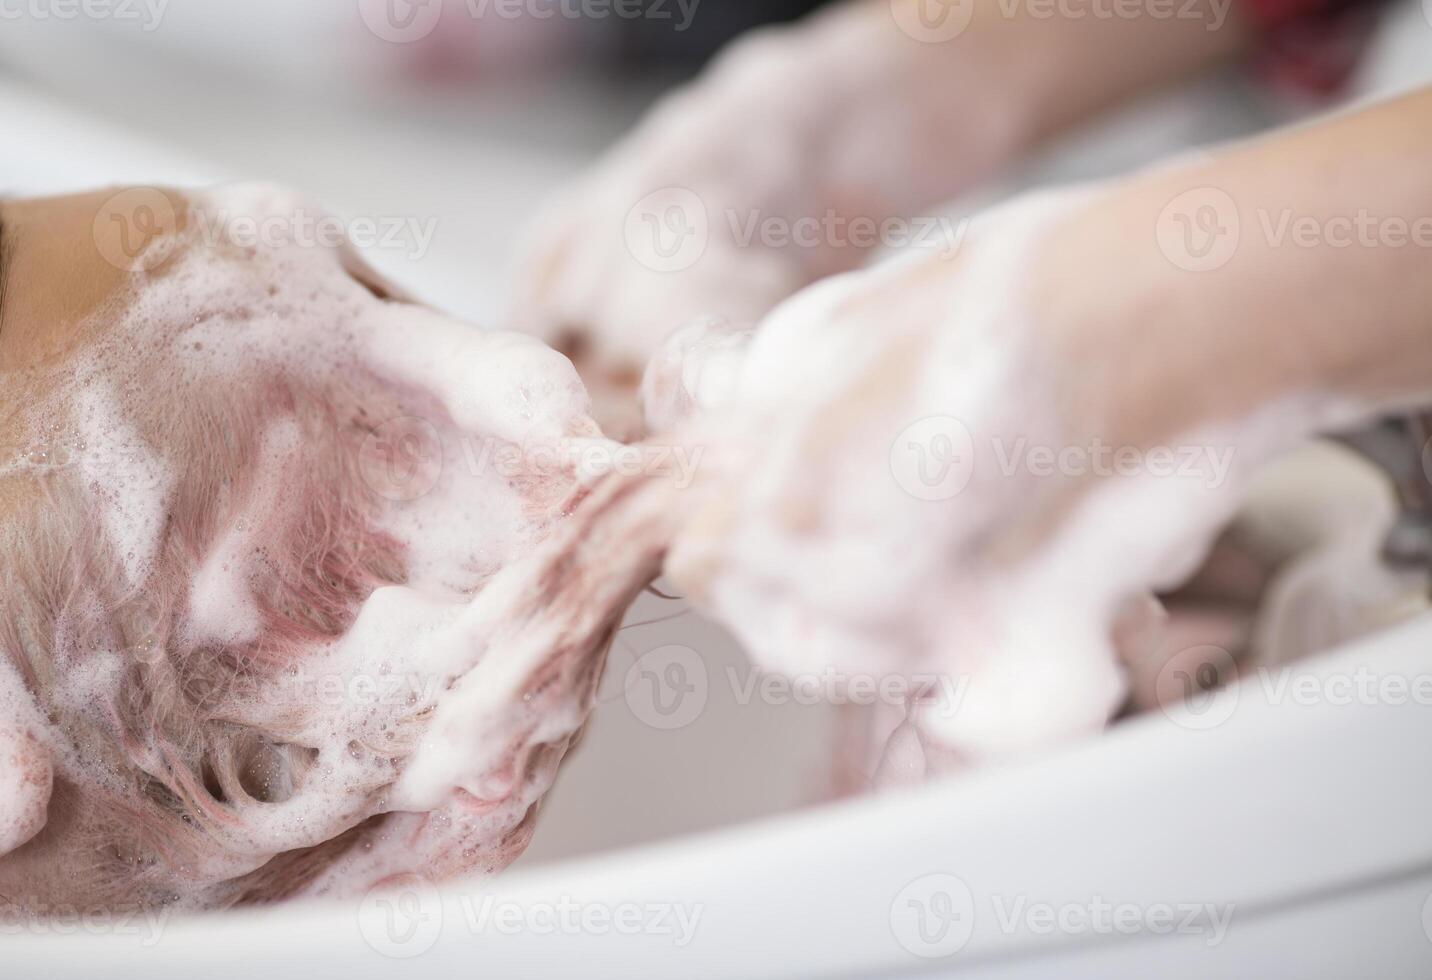 the hands of the hairdresser wash the client's hair with a thick lather. selective focus photo